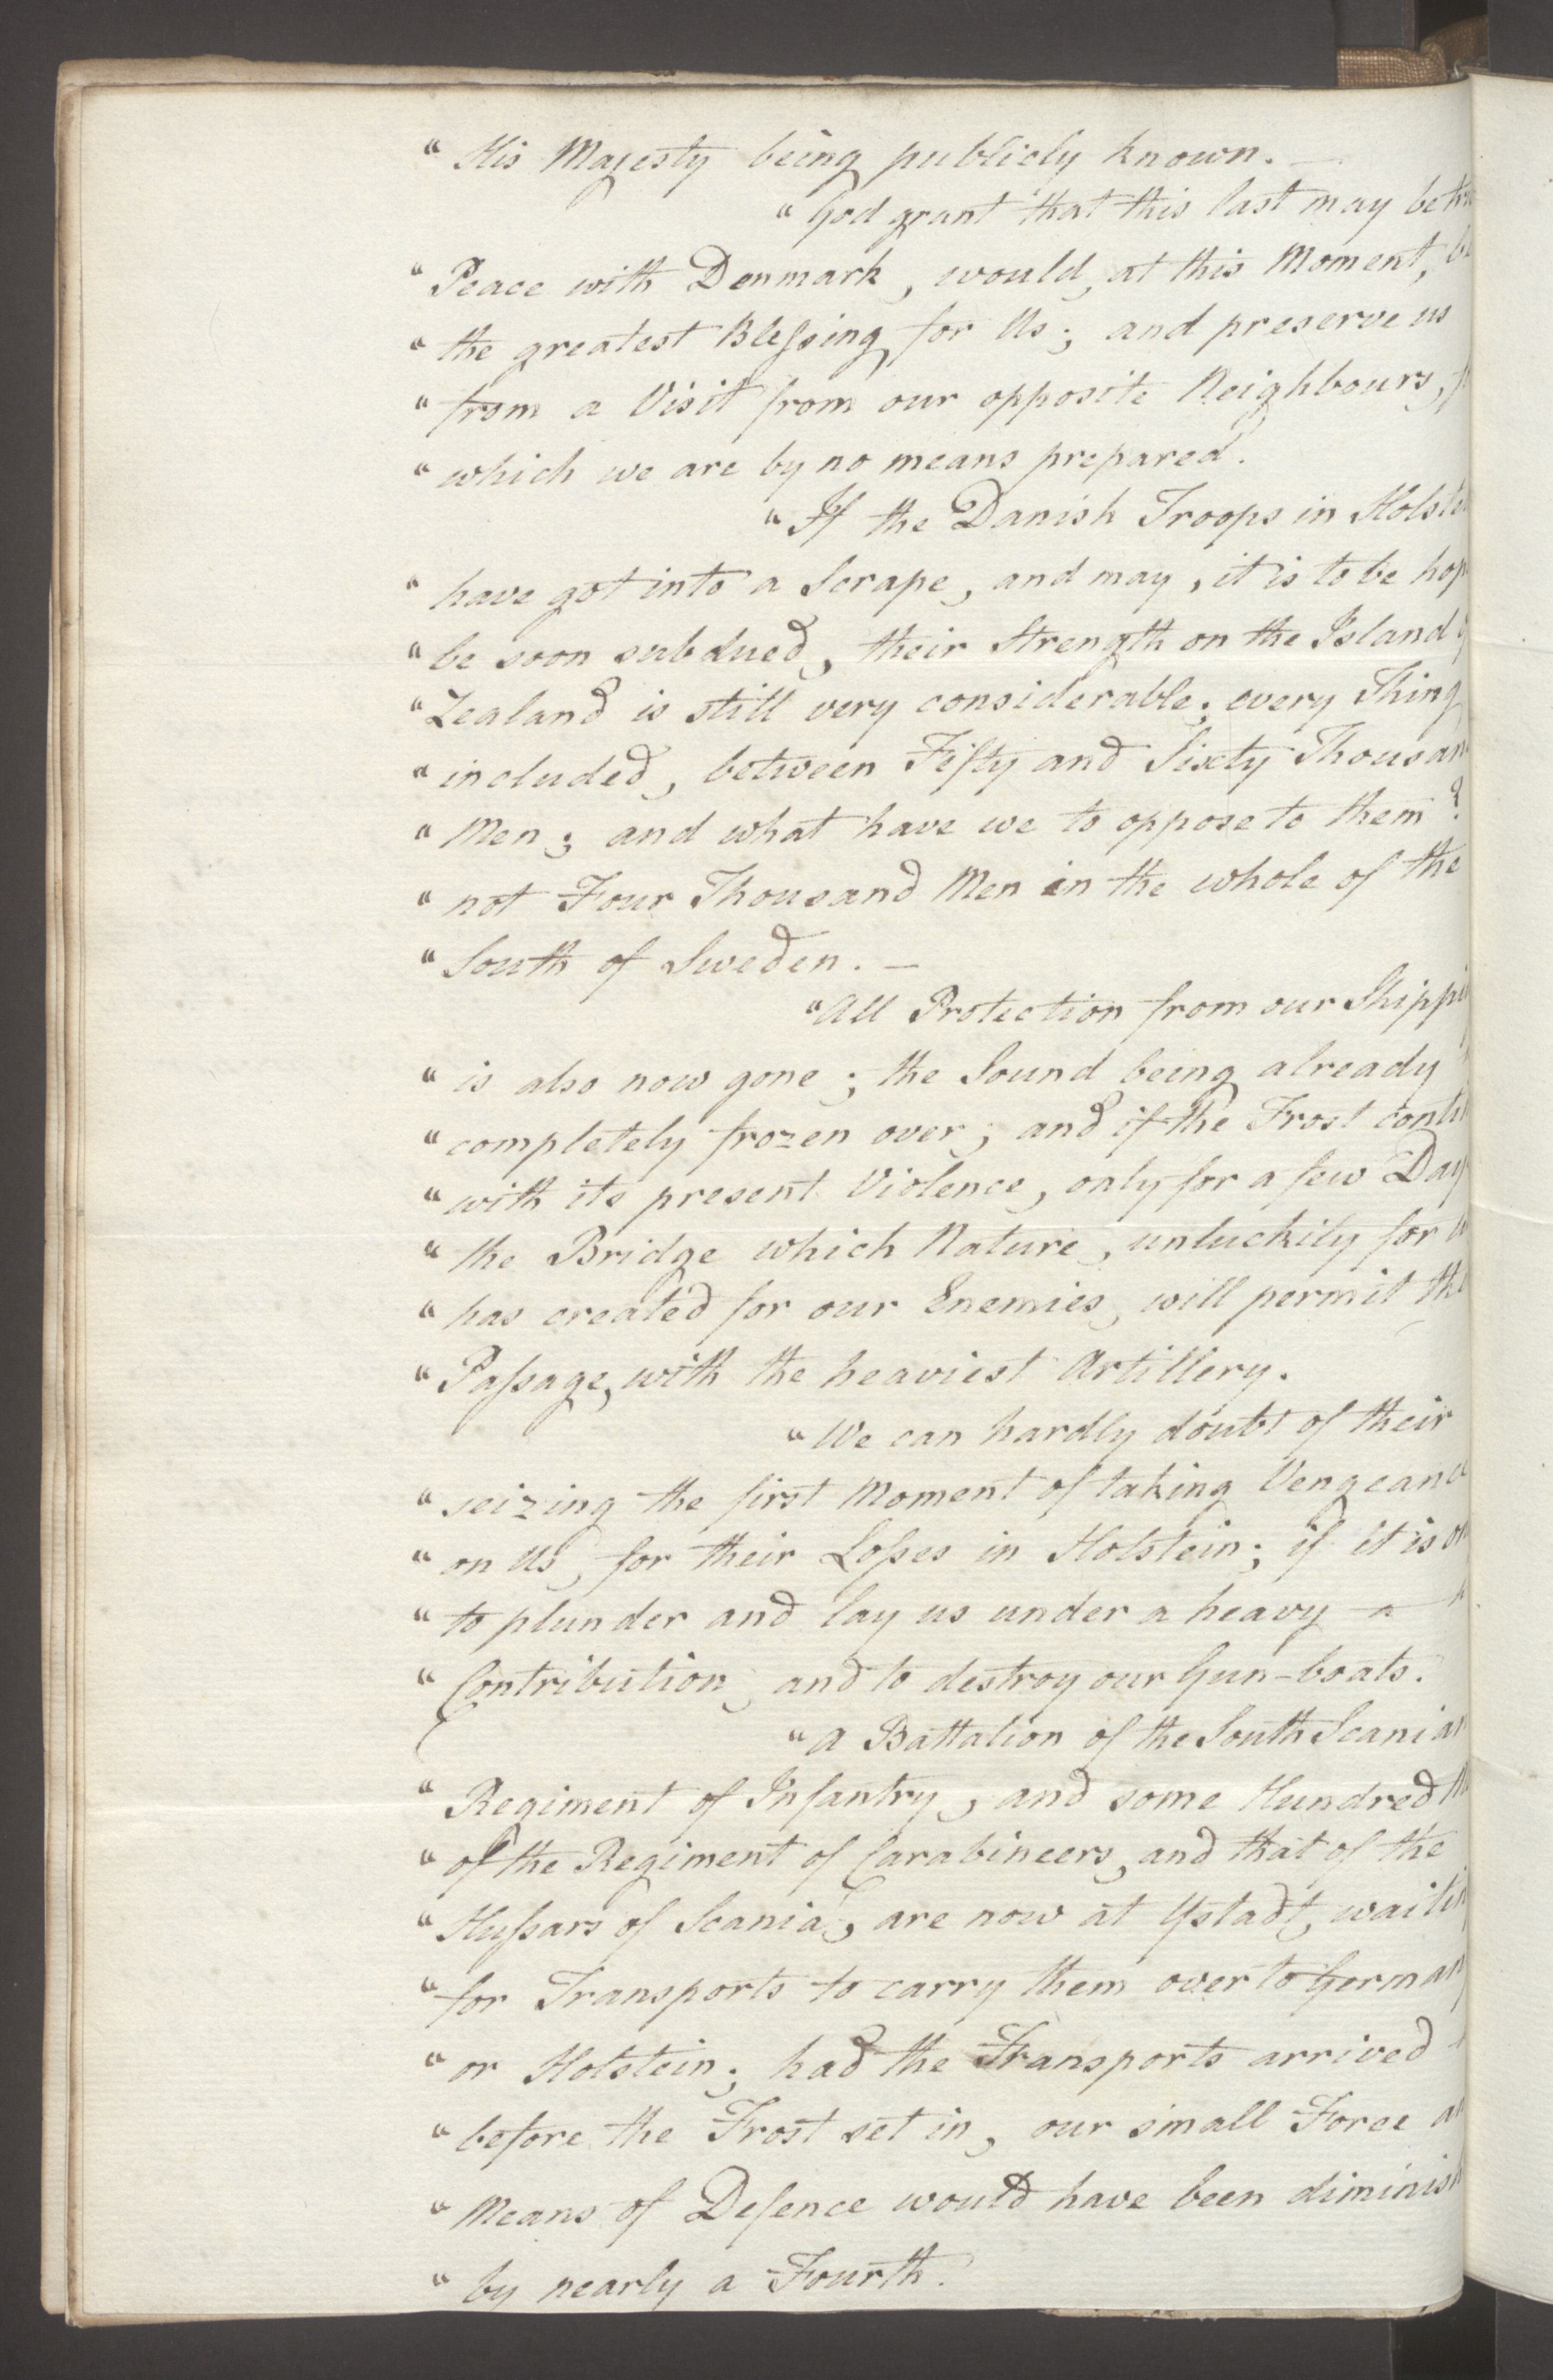 Foreign Office*, UKA/-/FO 38/16: Sir C. Gordon. Reports from Malmö, Jonkoping, and Helsingborg, 1814, s. 8